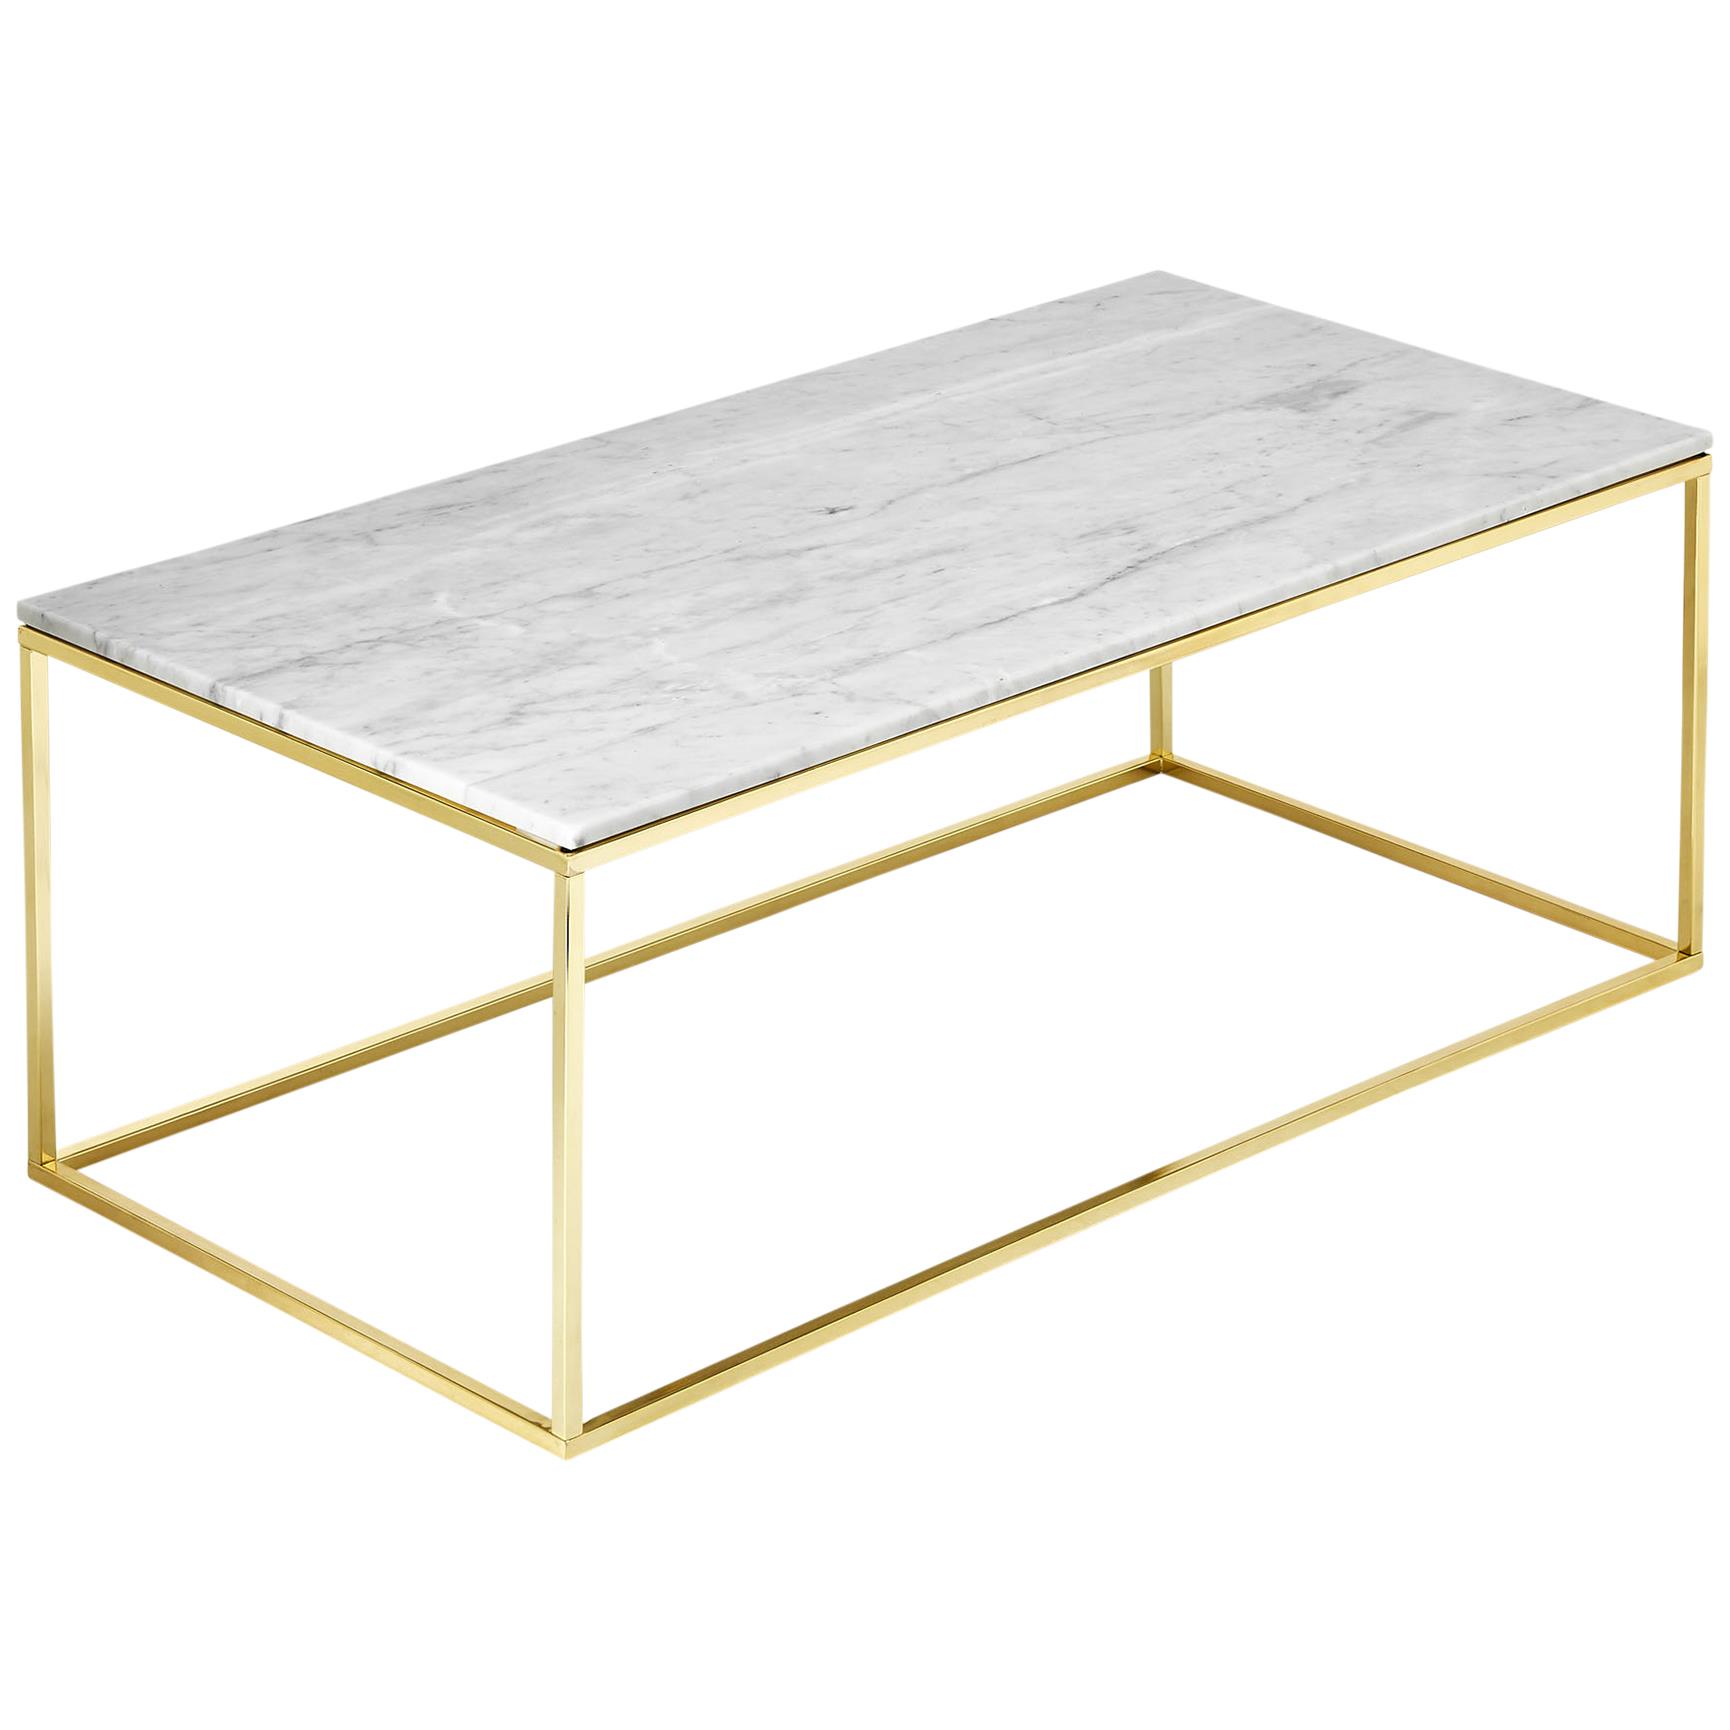 Coffee Table Como Gold With White Marble  W1100 x D550 x H400mm